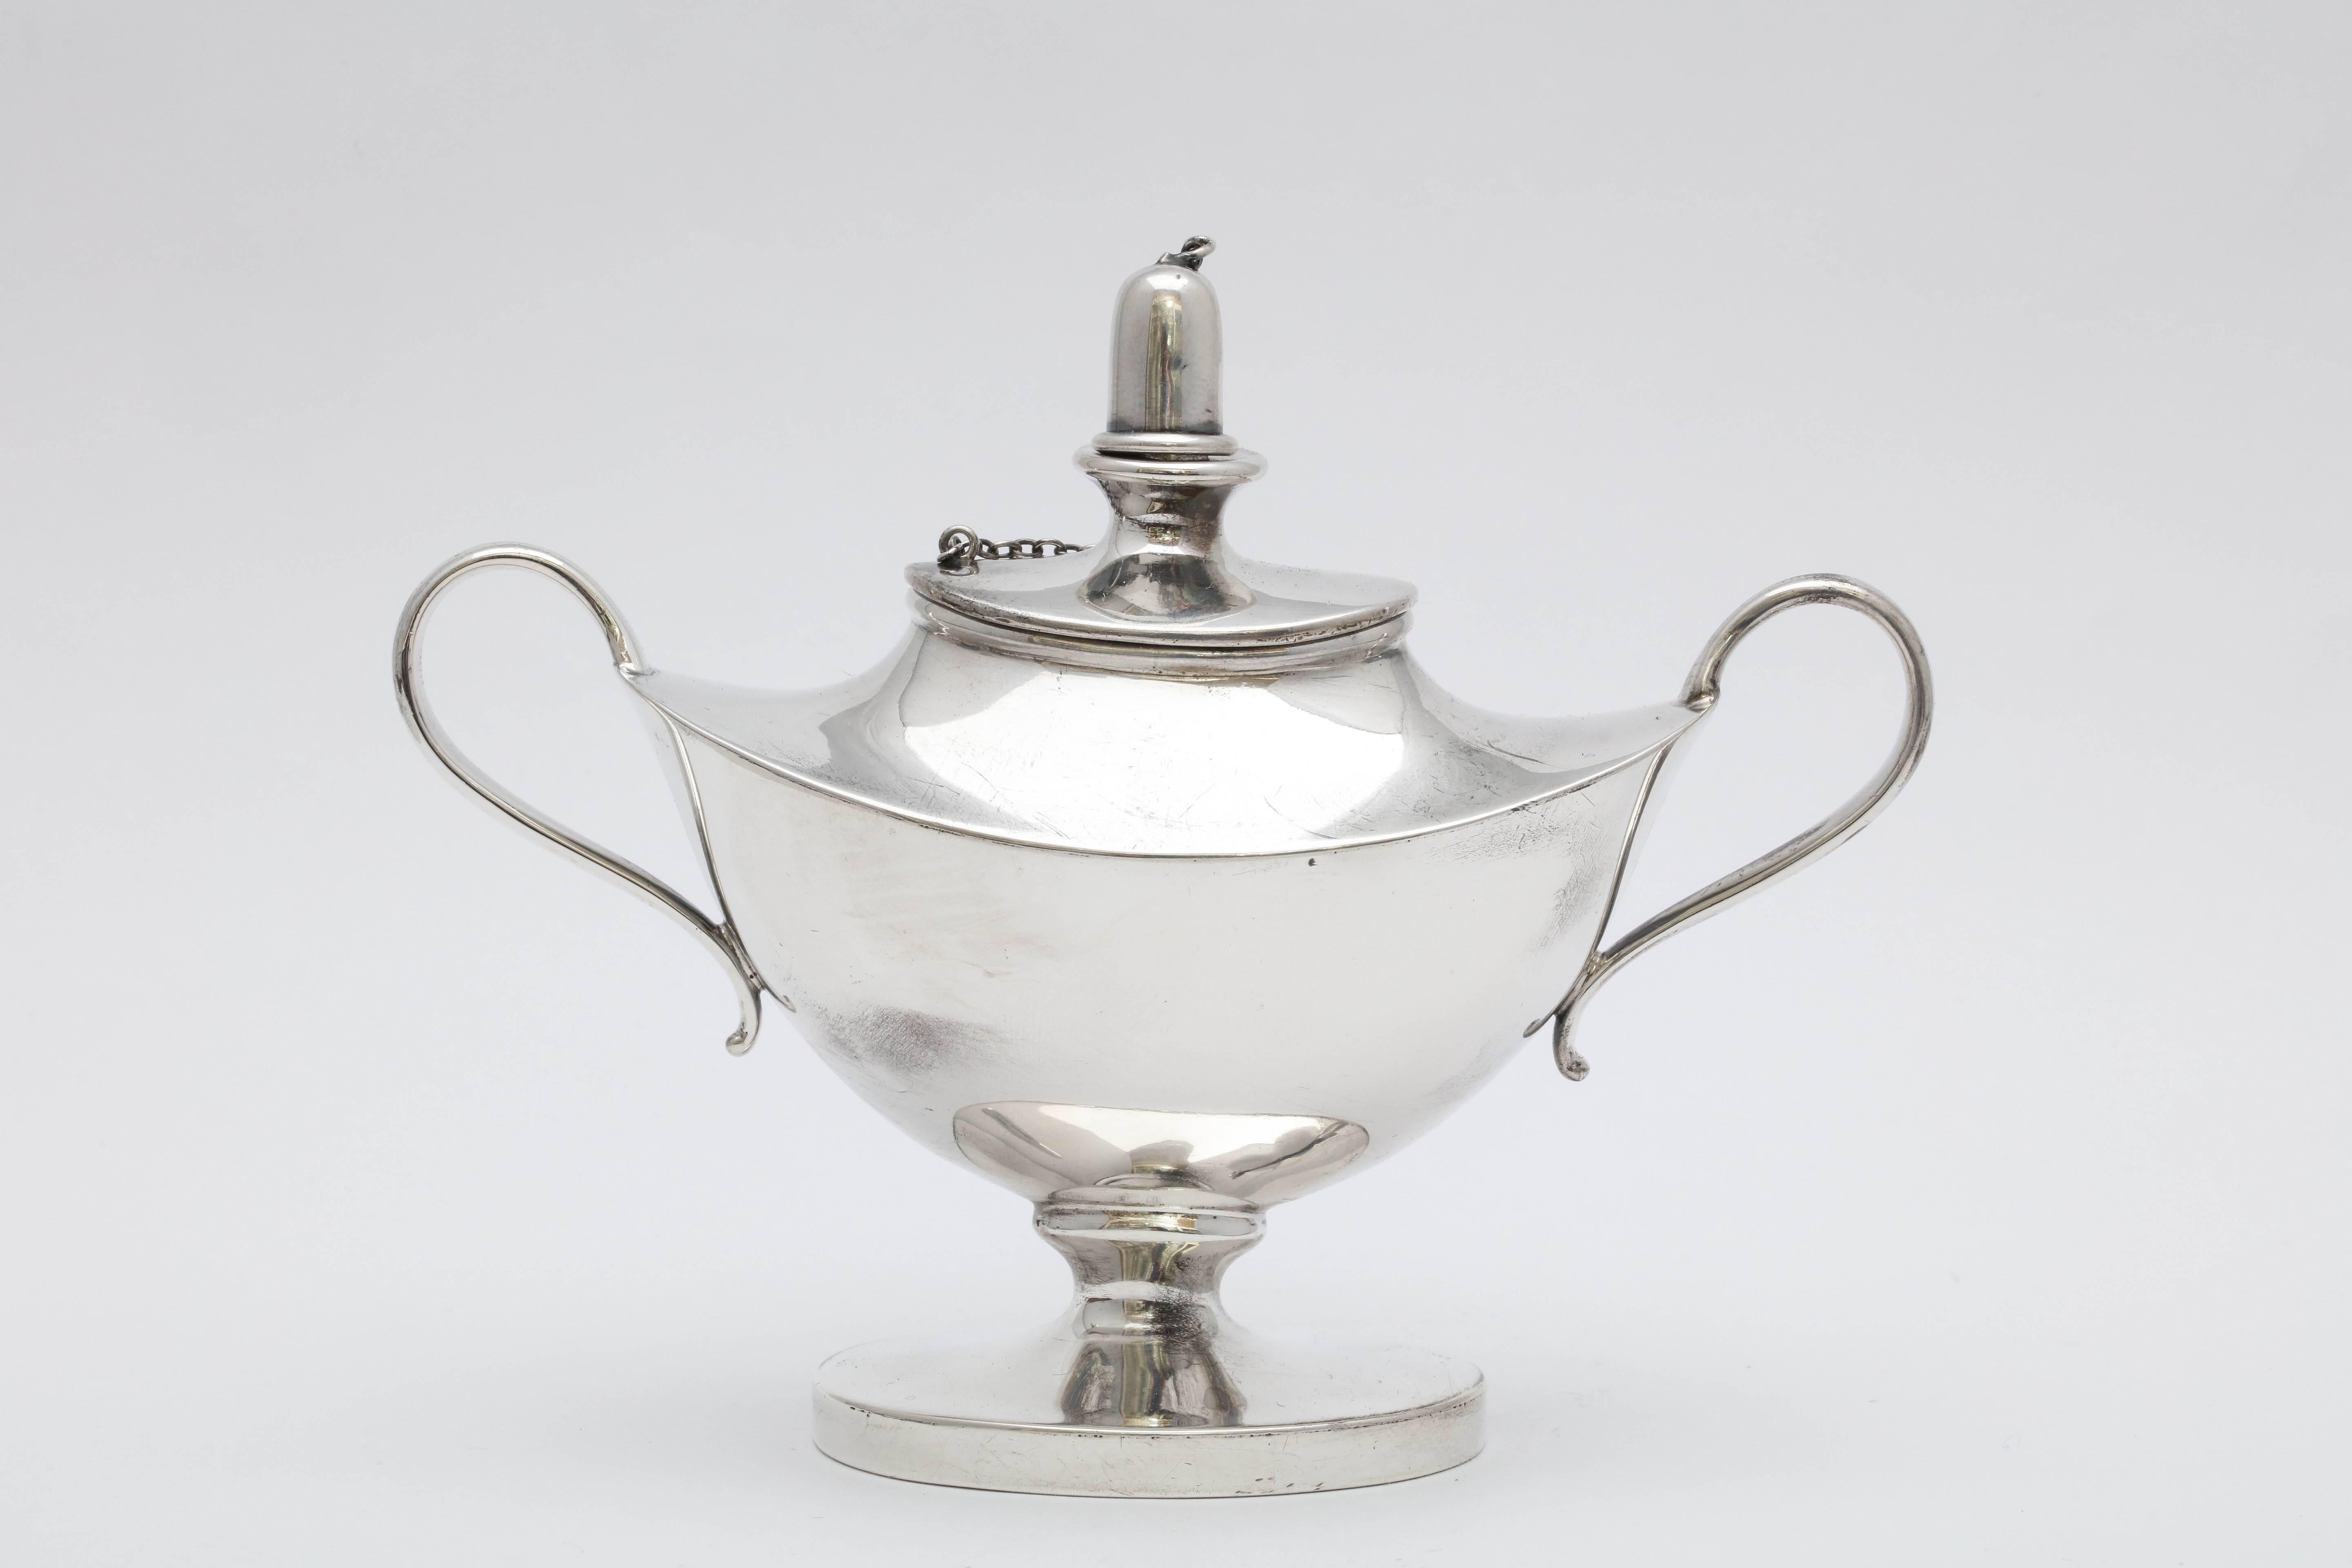 Edwardian, sterling silver, Aladdin's lamp-style table oil lamp or lighter, American, circa 1920s. Measures: 4 inches high (at highest point) x 5 inches across from handle to handle x 2 inches deep at deepest point. Weighs 3.930 troy ounces. Oval